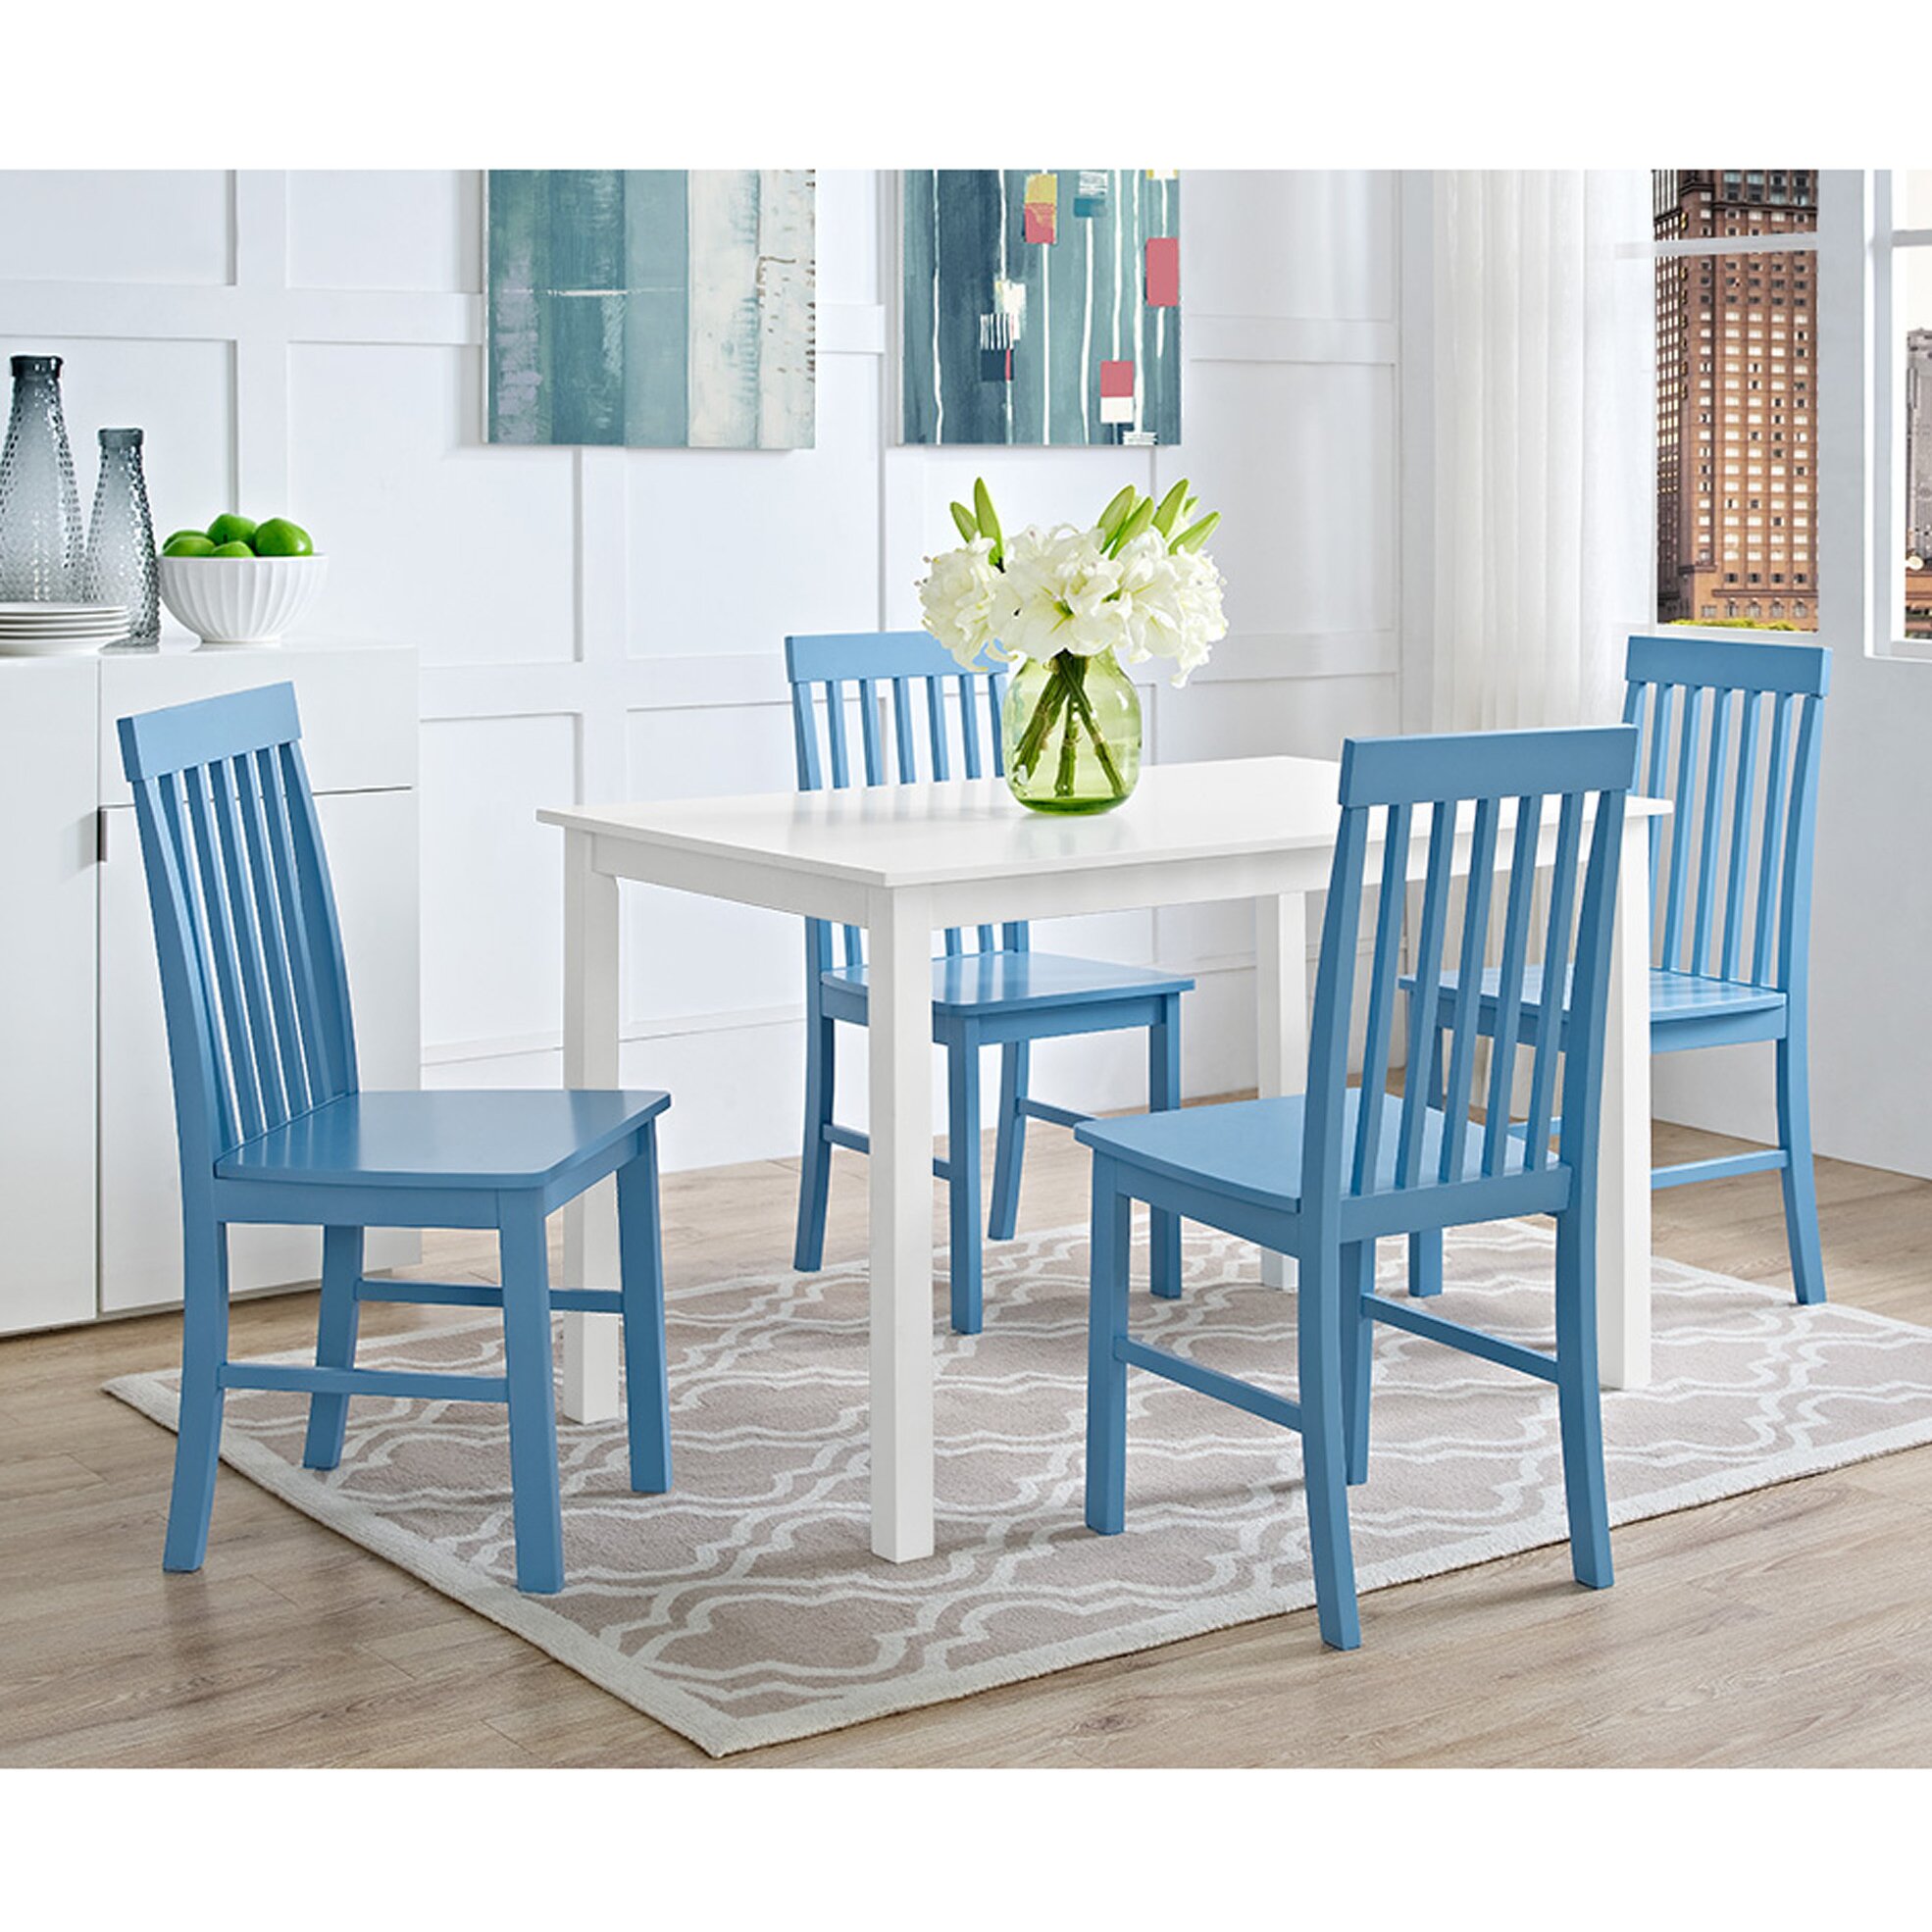 Beachcrest Home Indian Harbour 5 Piece Dining Set ...